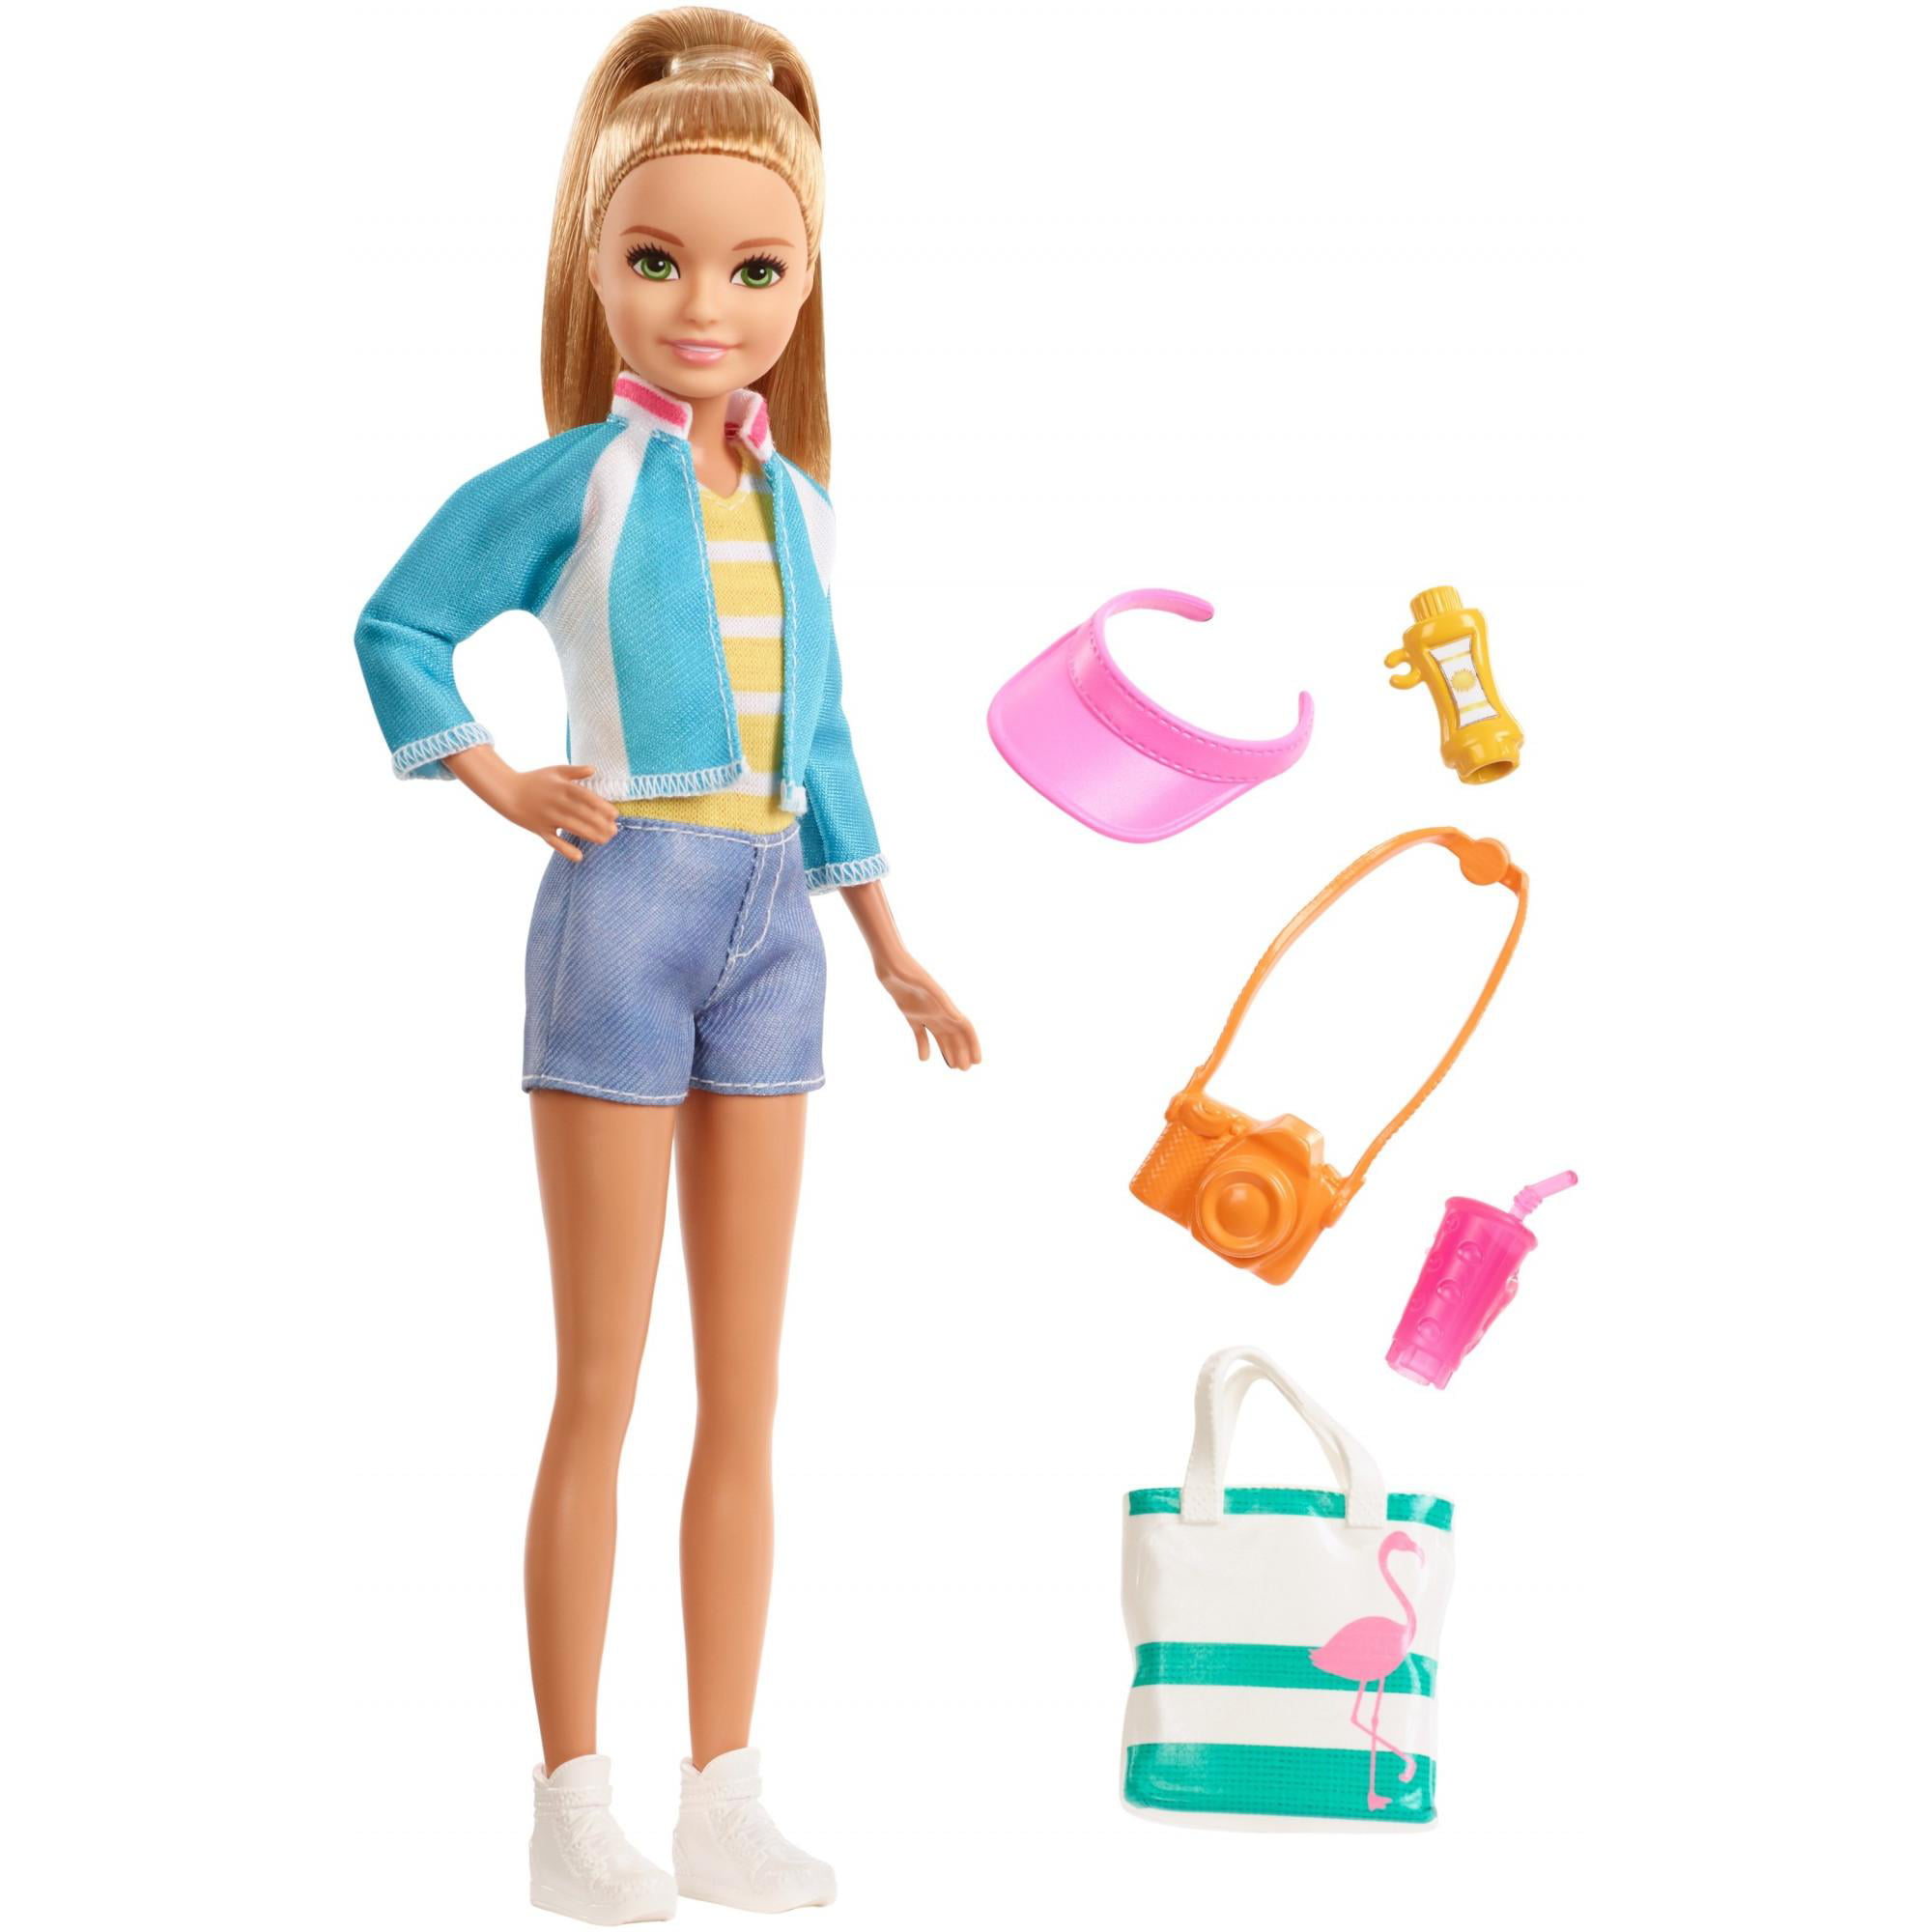 Barbie Stacie Travel Doll with 5 Tourist Themed